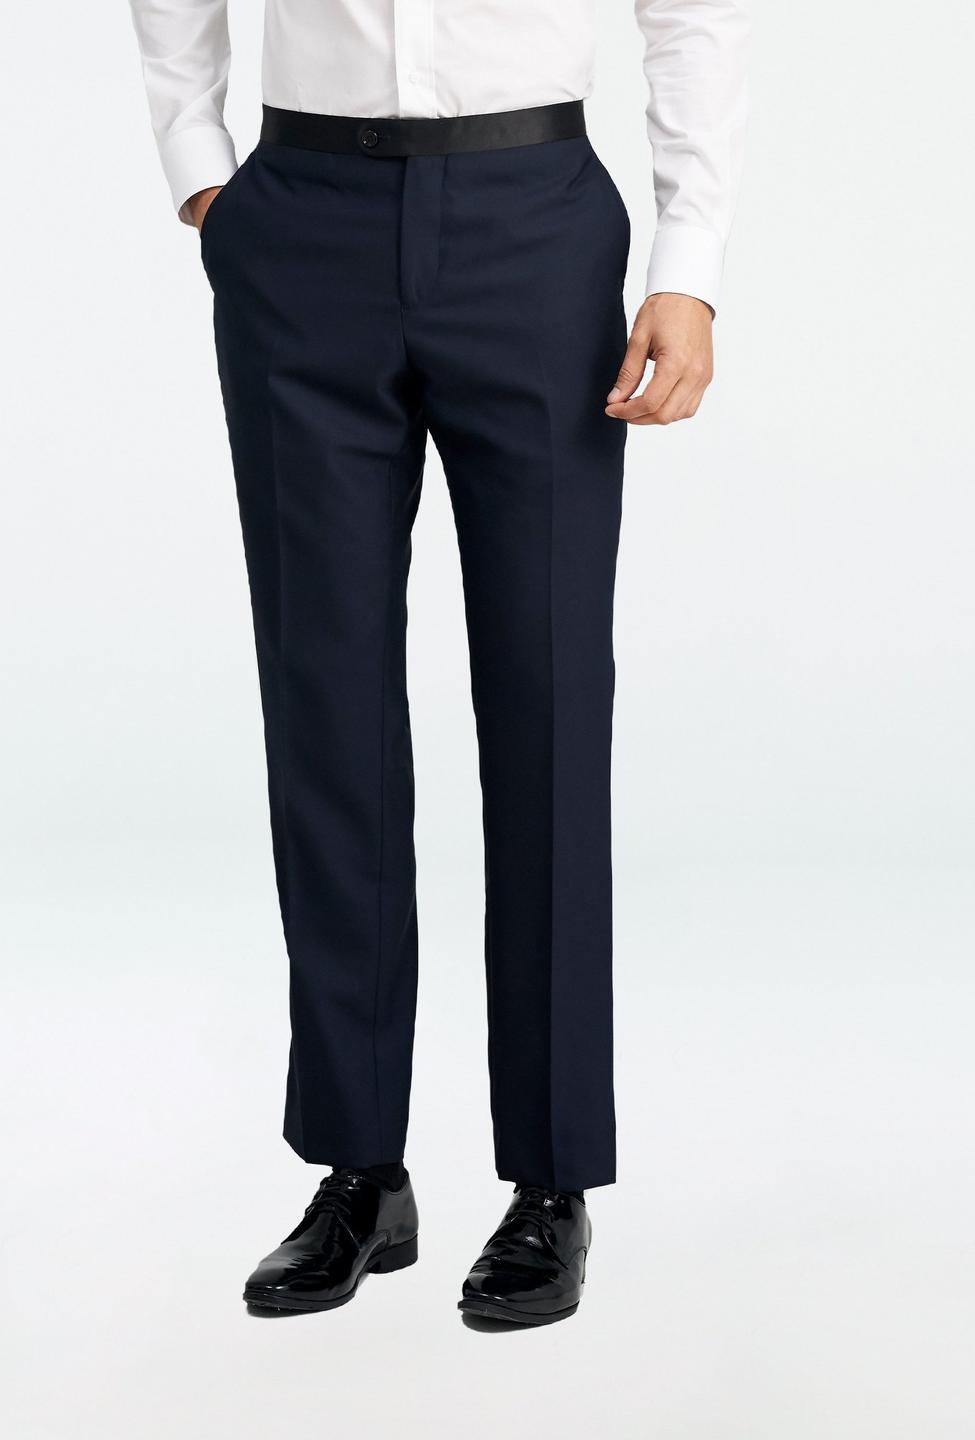 Blue pants - Hampton Solid Design from Premium Indochino Collection